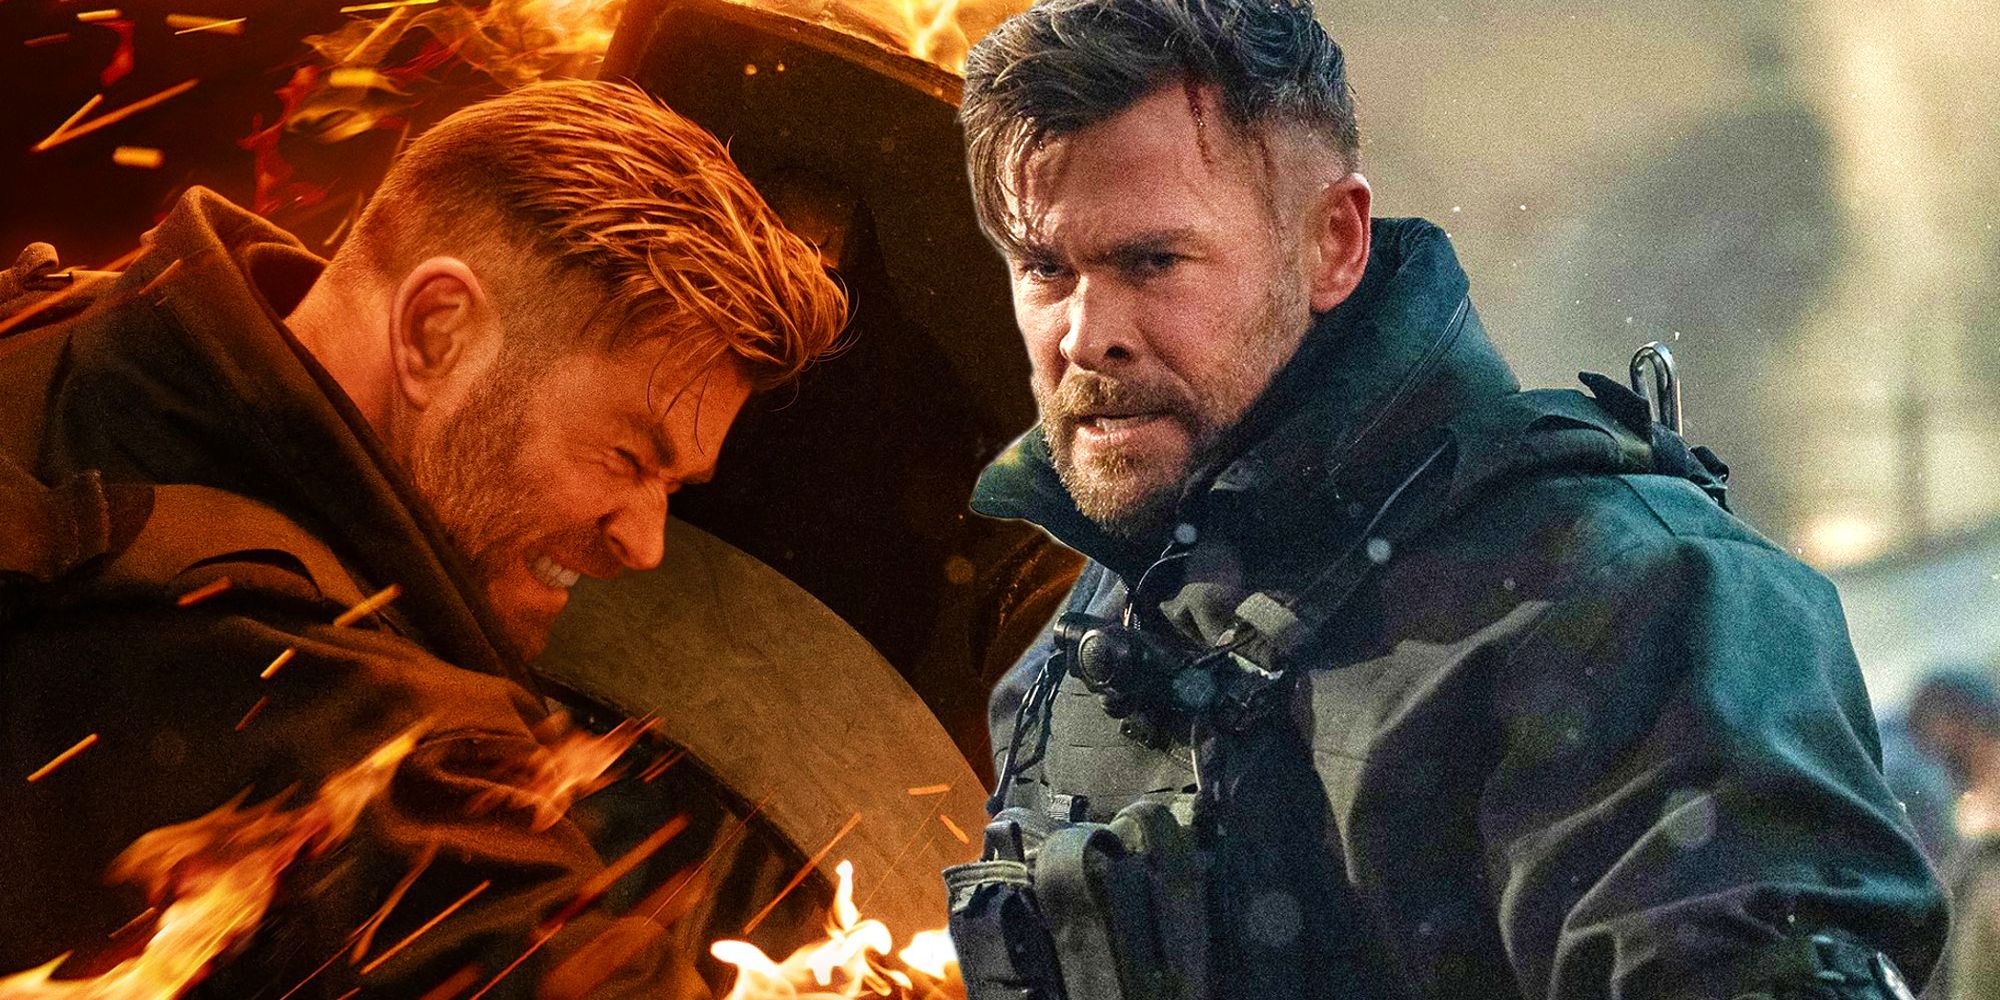 Chris Hemsworth's Tyler surrounded by flames in the Extraction 2 poster and ready for battle in the prison scene